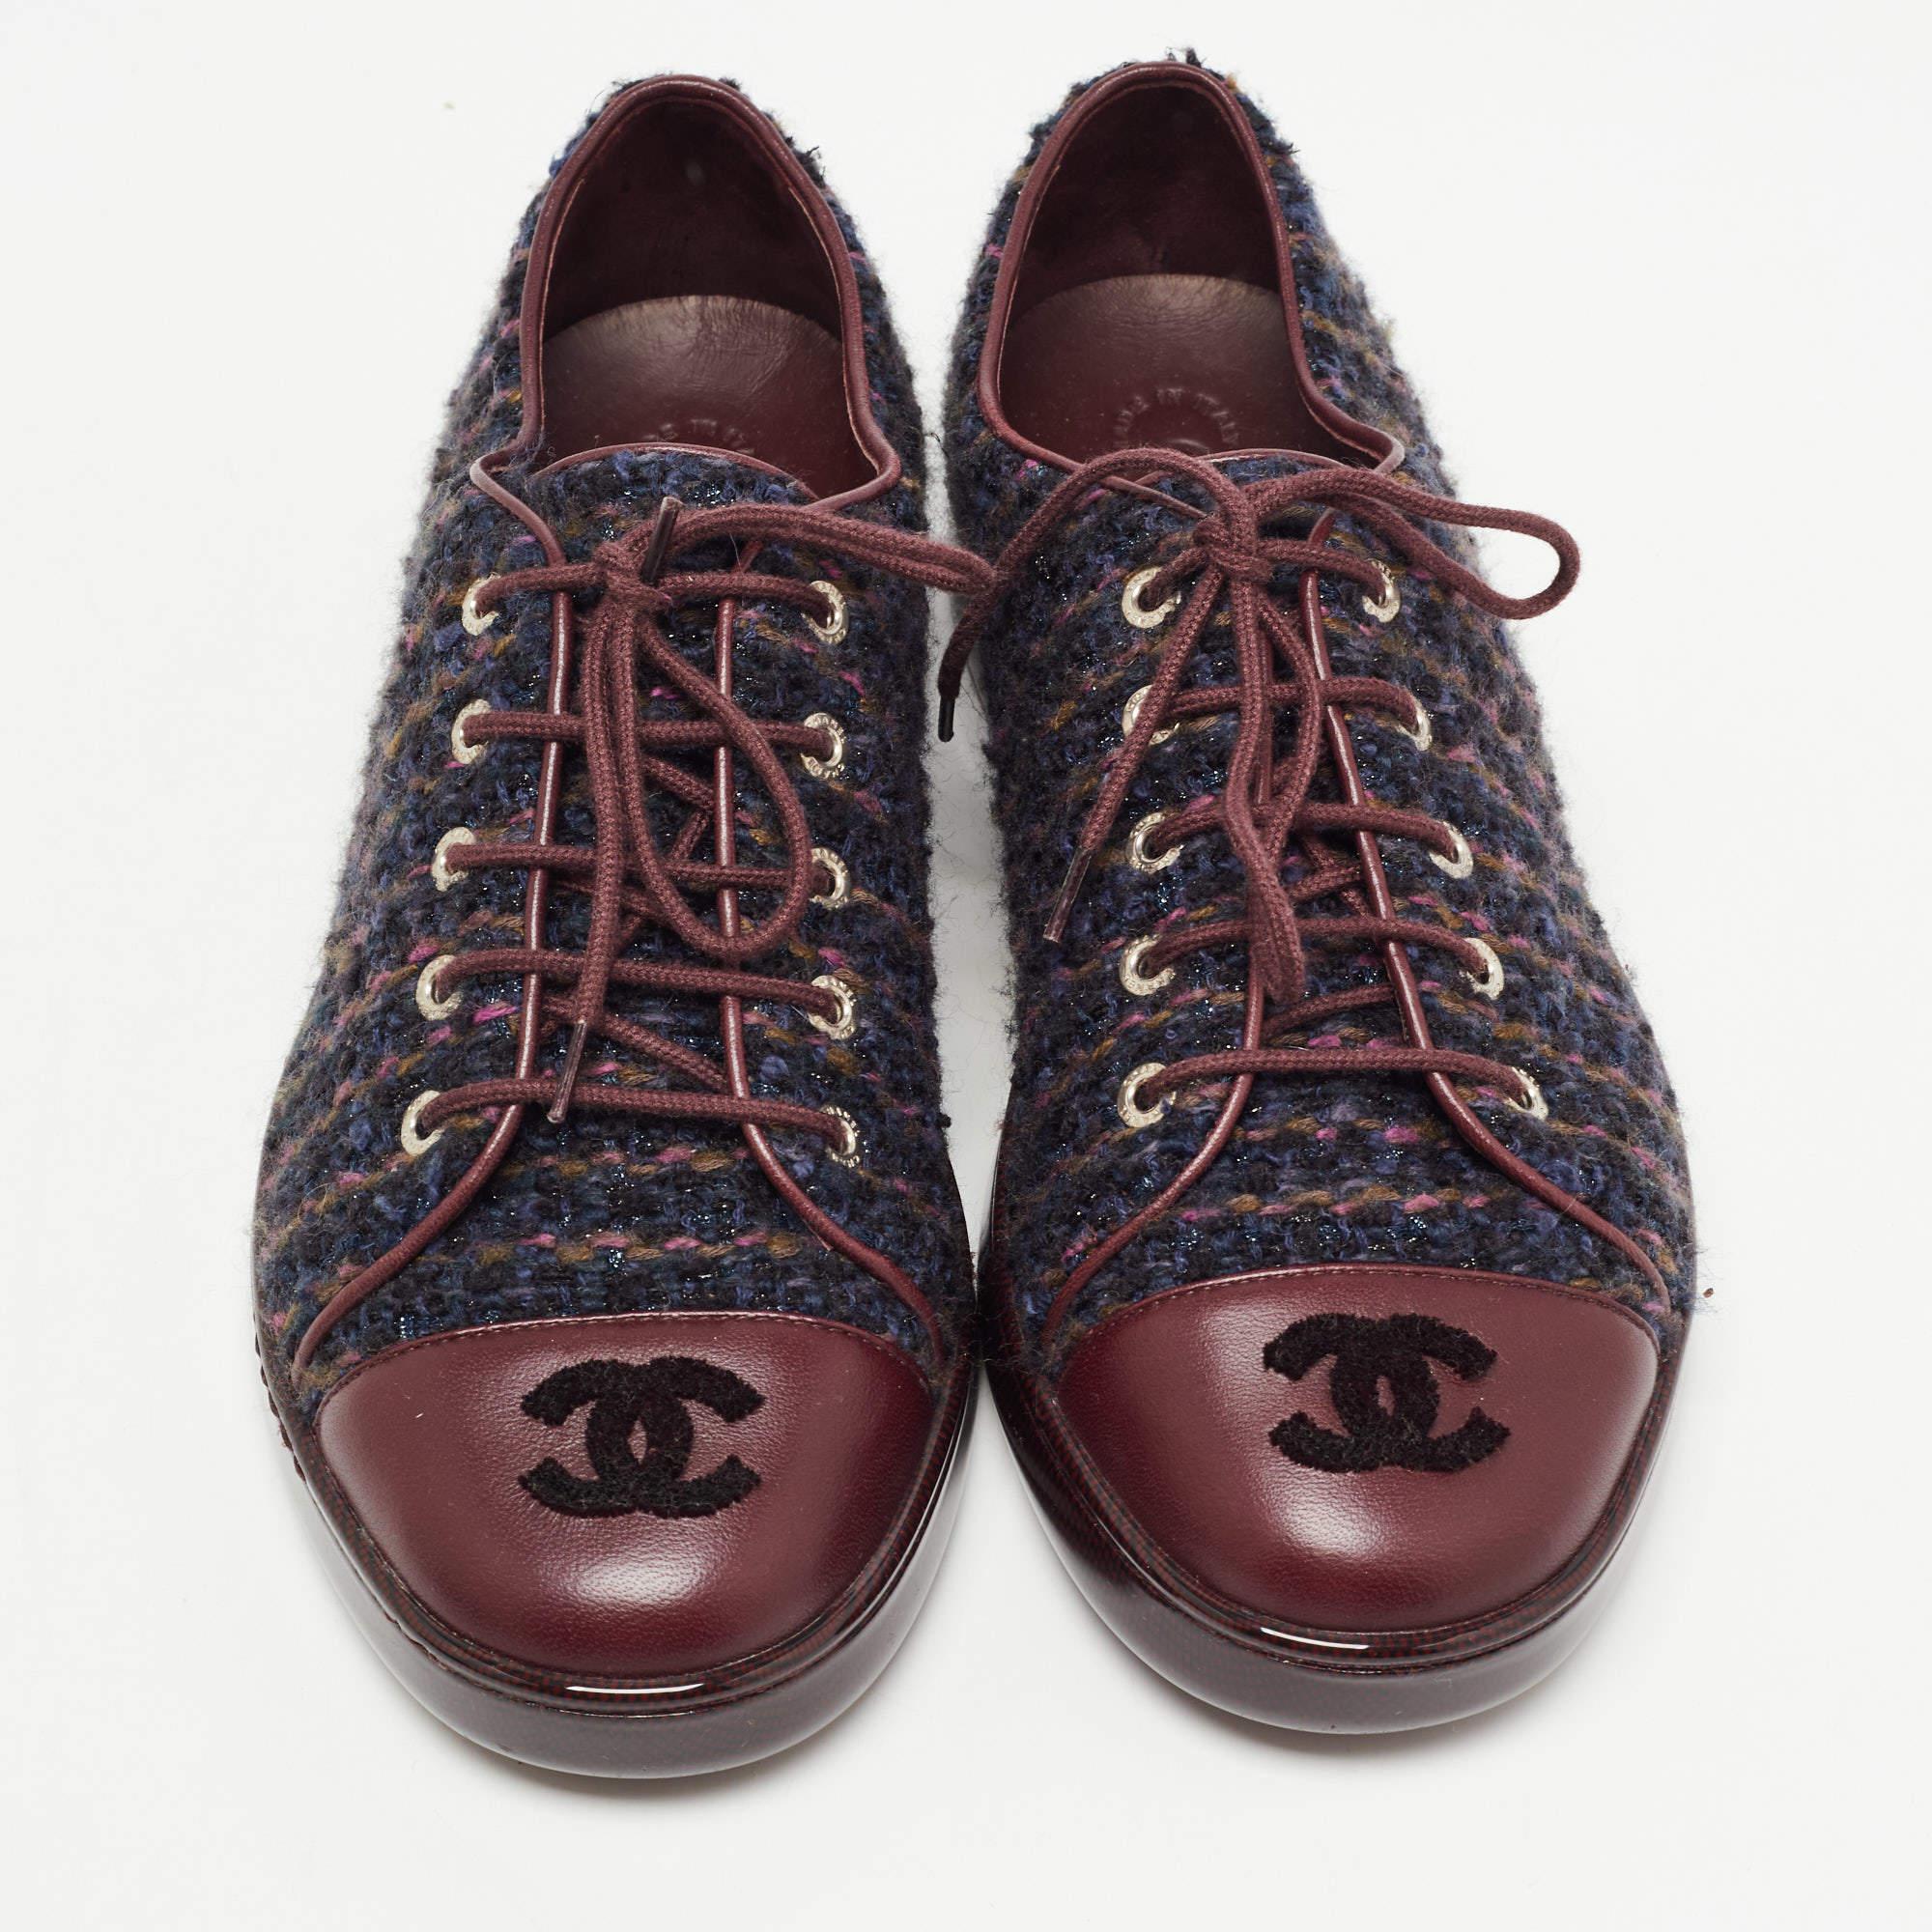 Chanel Burgundy Tweed and Leather CC Cap Low Top Sneakers Size 38 1